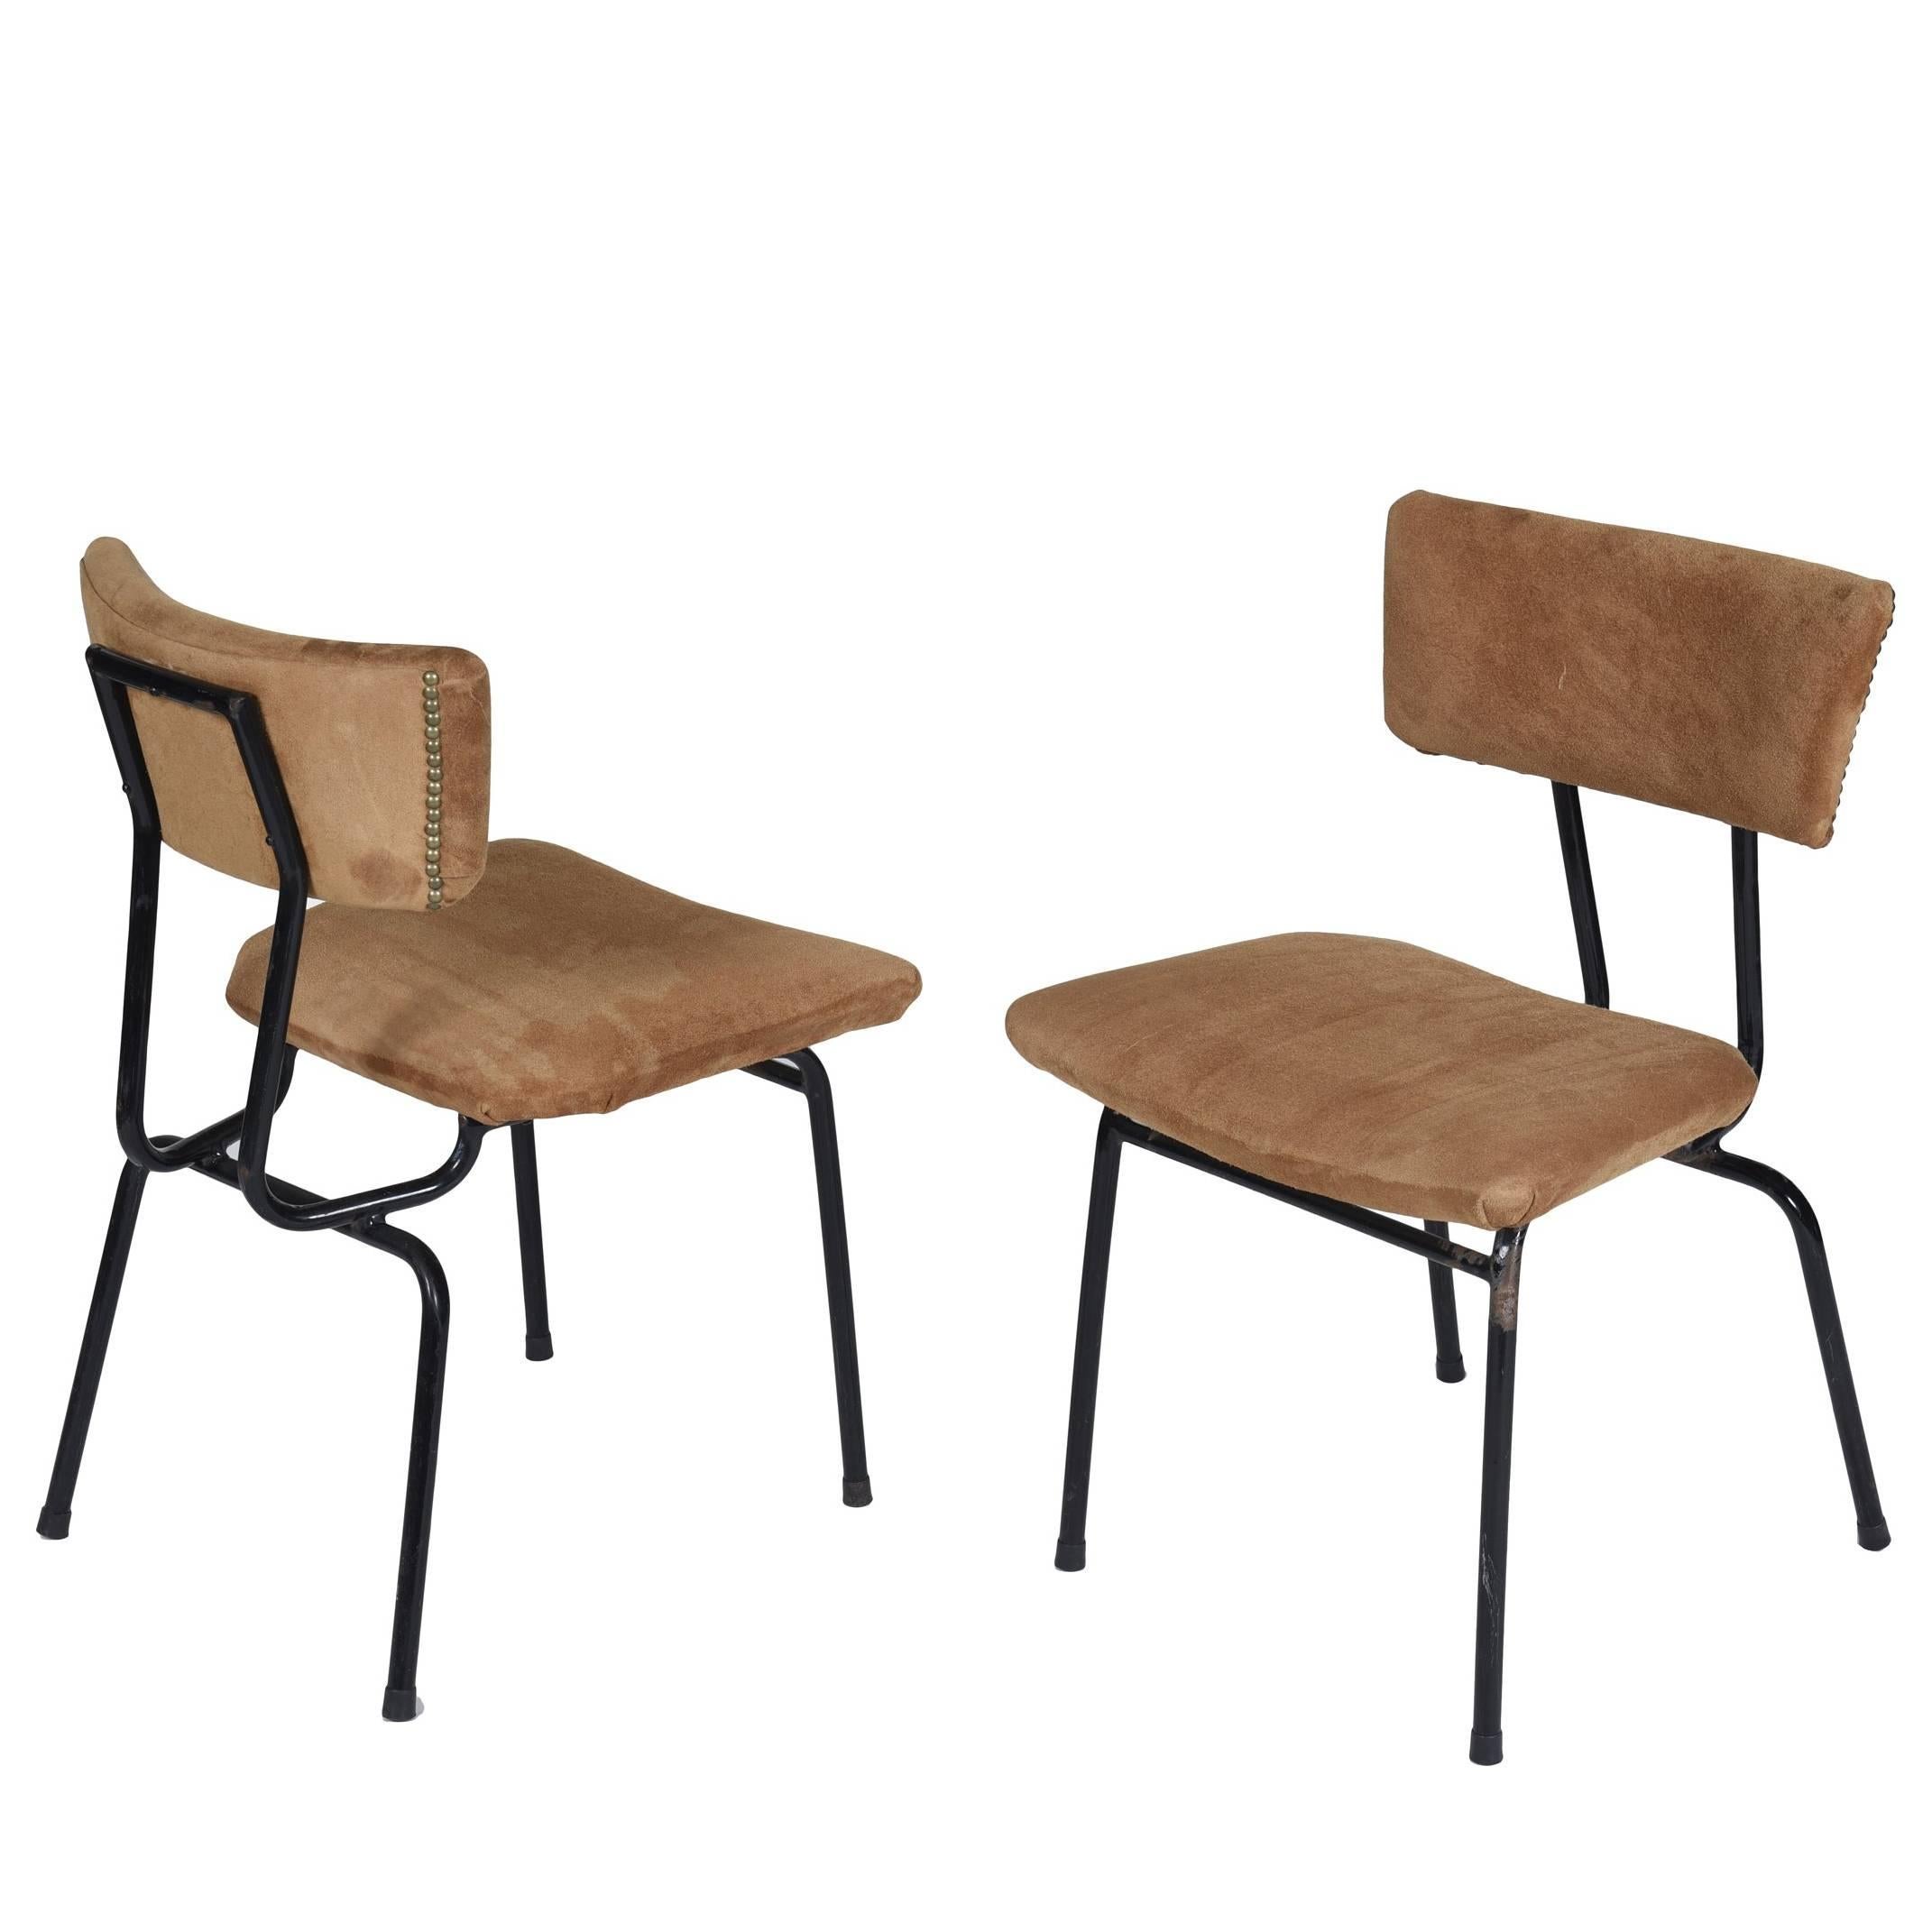 Paubra Midcentury brazilian Chair in Metal and Suede, 1950s

This set of chairs was produced in the same factory of the furniture of Lina, that lasted about 3 years, between the end of the decade of 40 and beginning of years 50 (previously it was